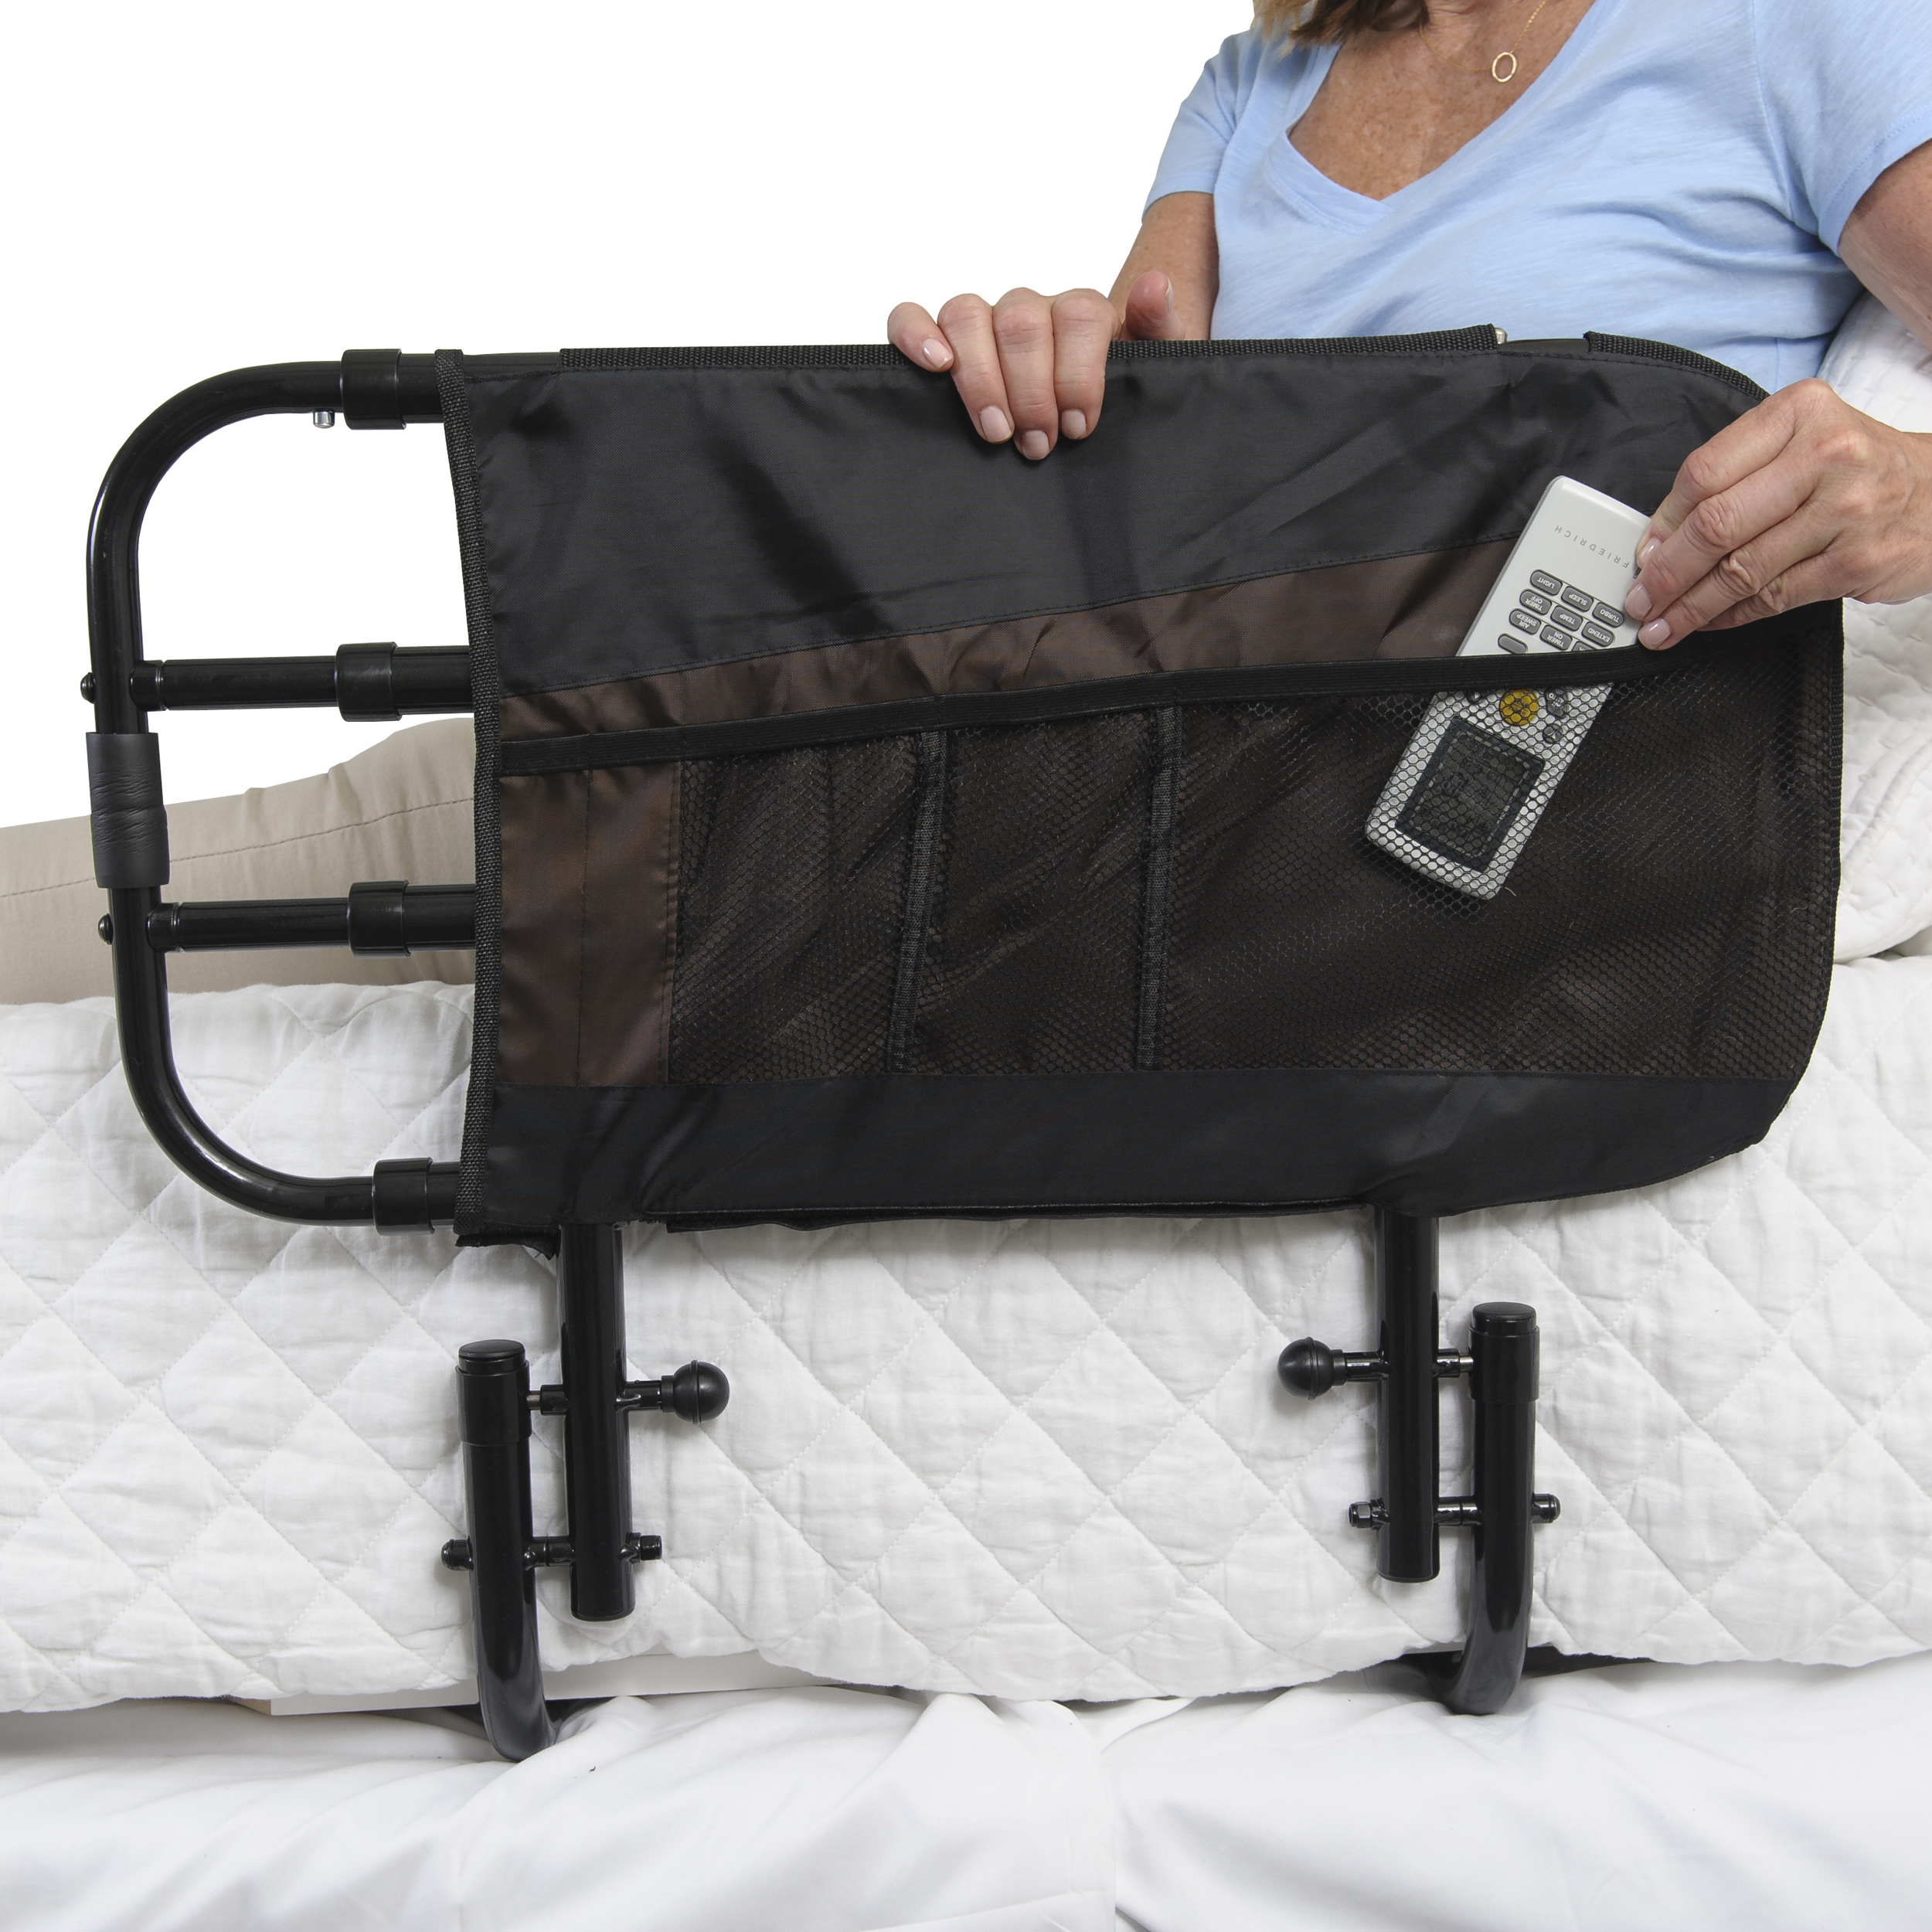 Zoomed in product image Bed Rail EZ Adjust - organizer pouch